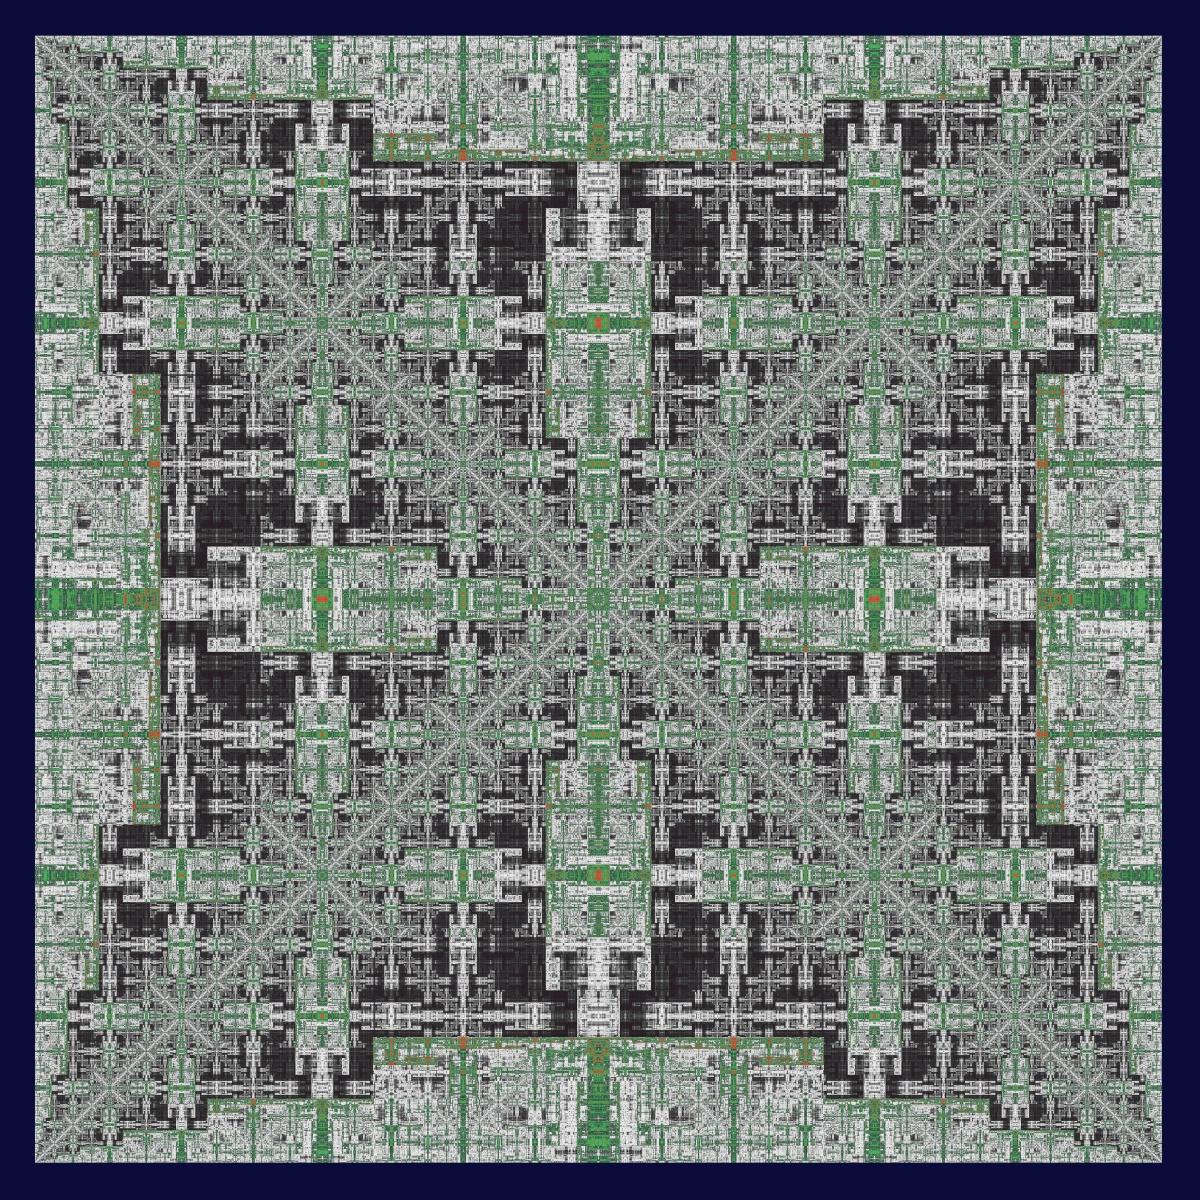 Image for entry 'Neural chip, 2051'